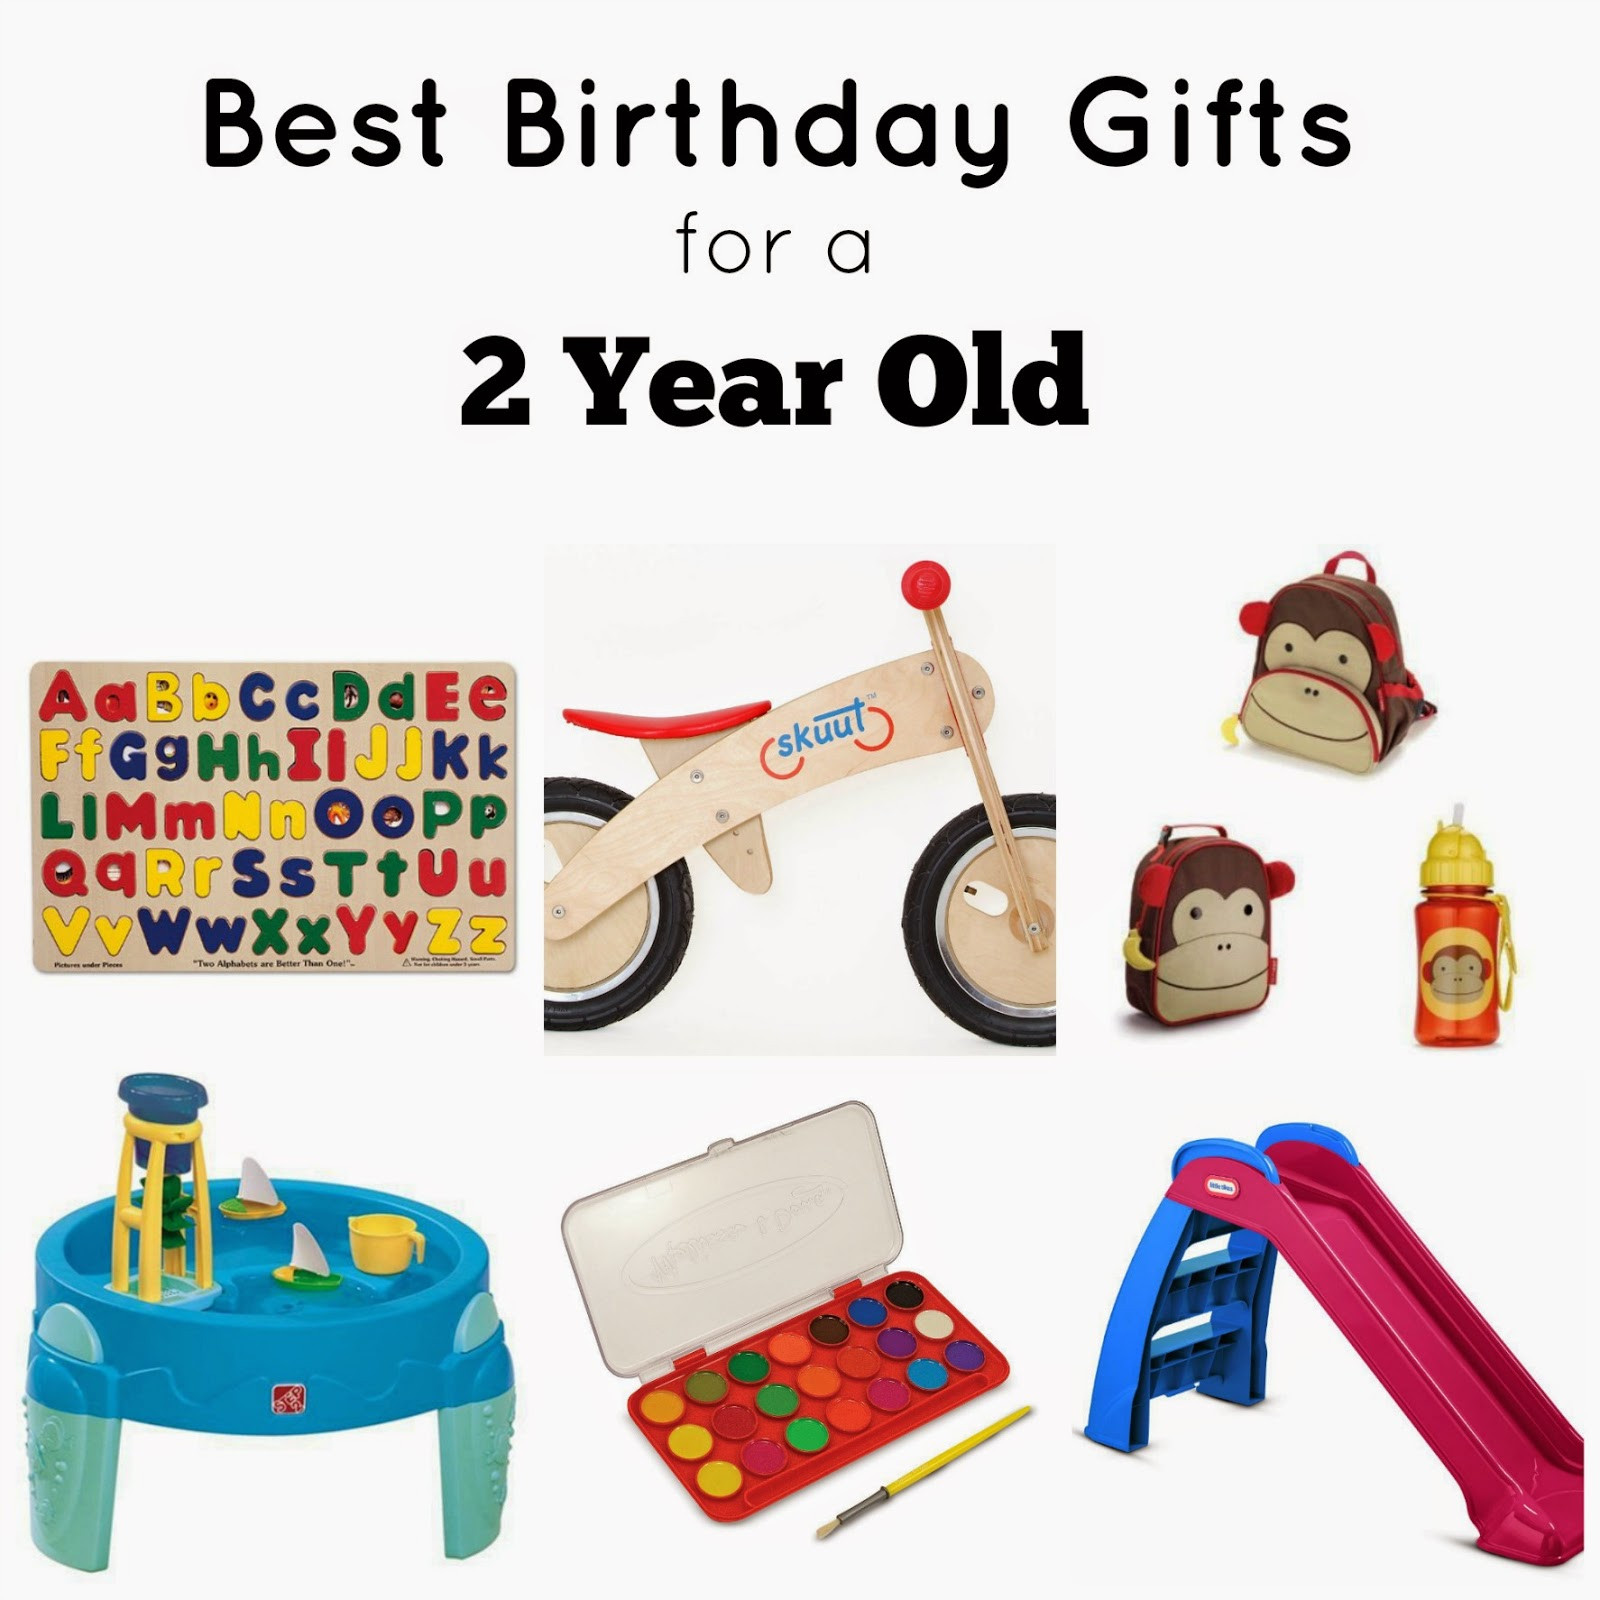 Best ideas about Best 2 Year Old Birthday Gifts
. Save or Pin Our Life on a Bud Best Birthday Gifts for a 2 Year Old Now.